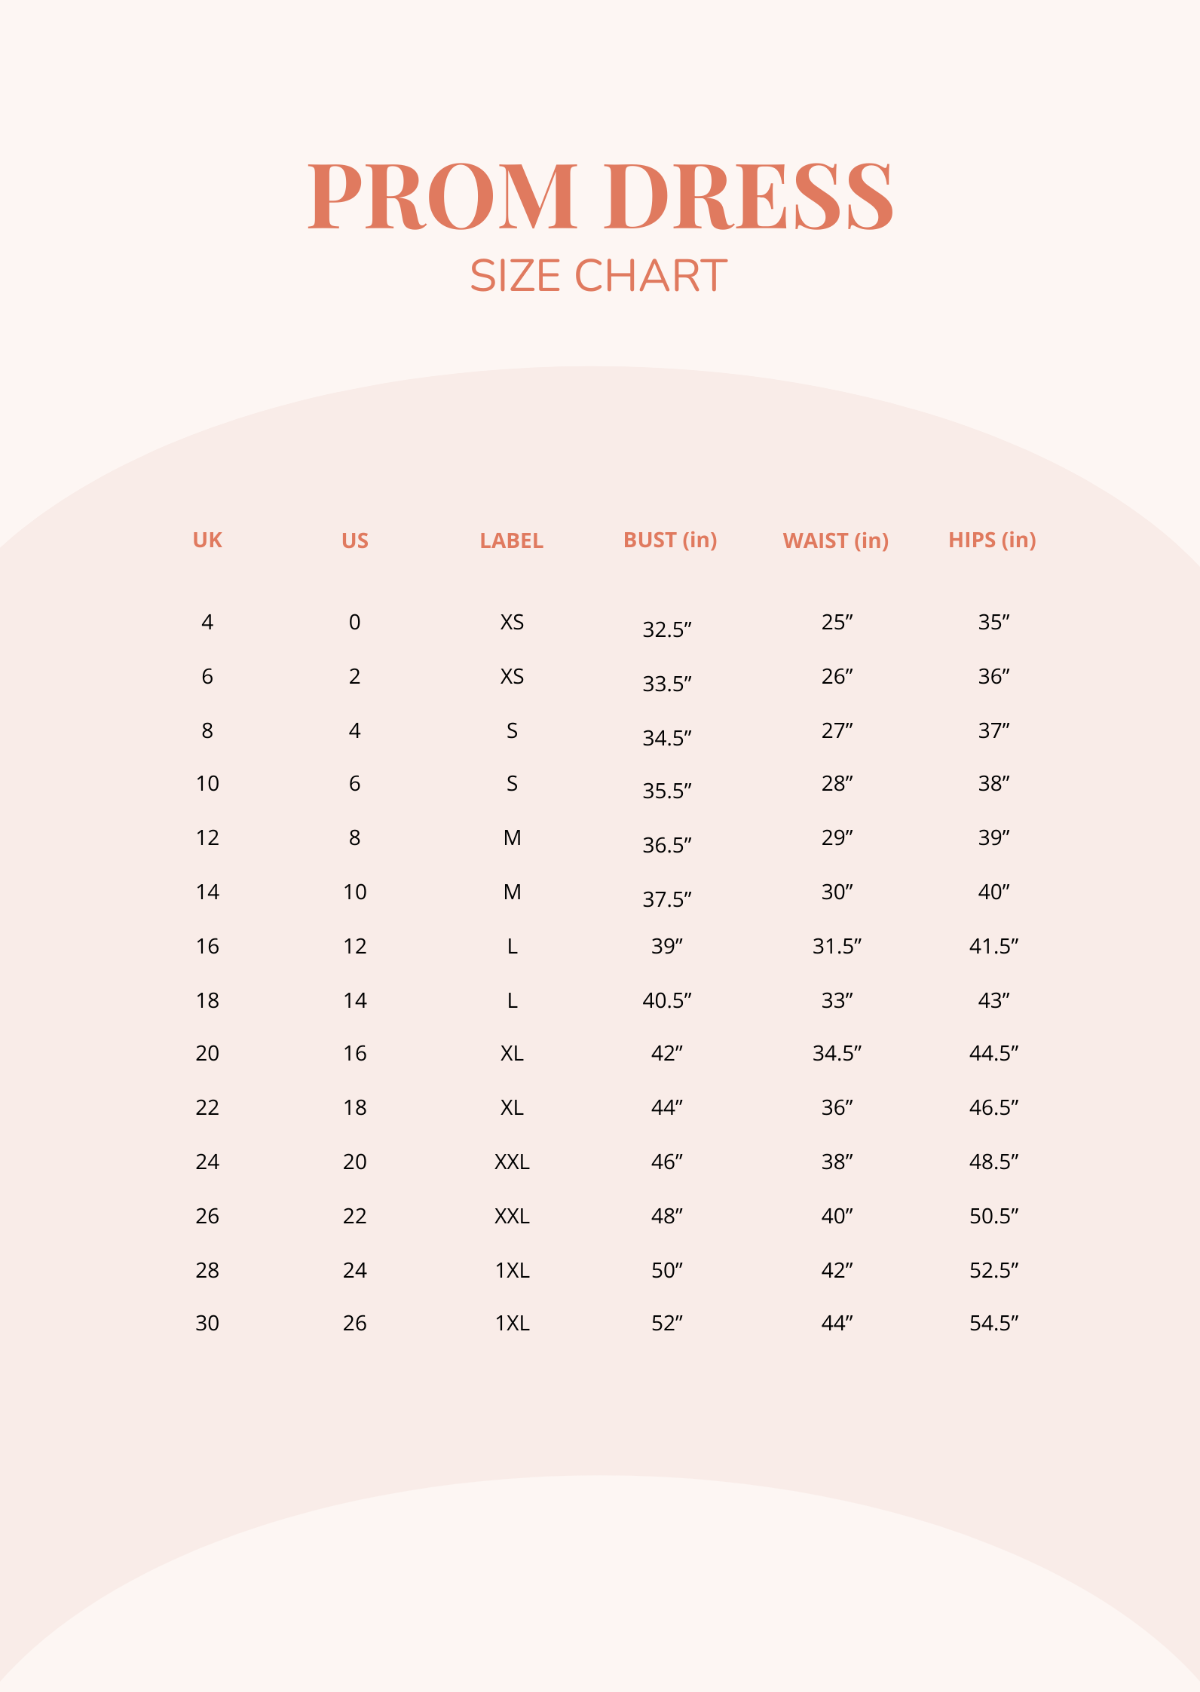 FREE Dress Size Chart Templates & Examples - Edit Online & Download